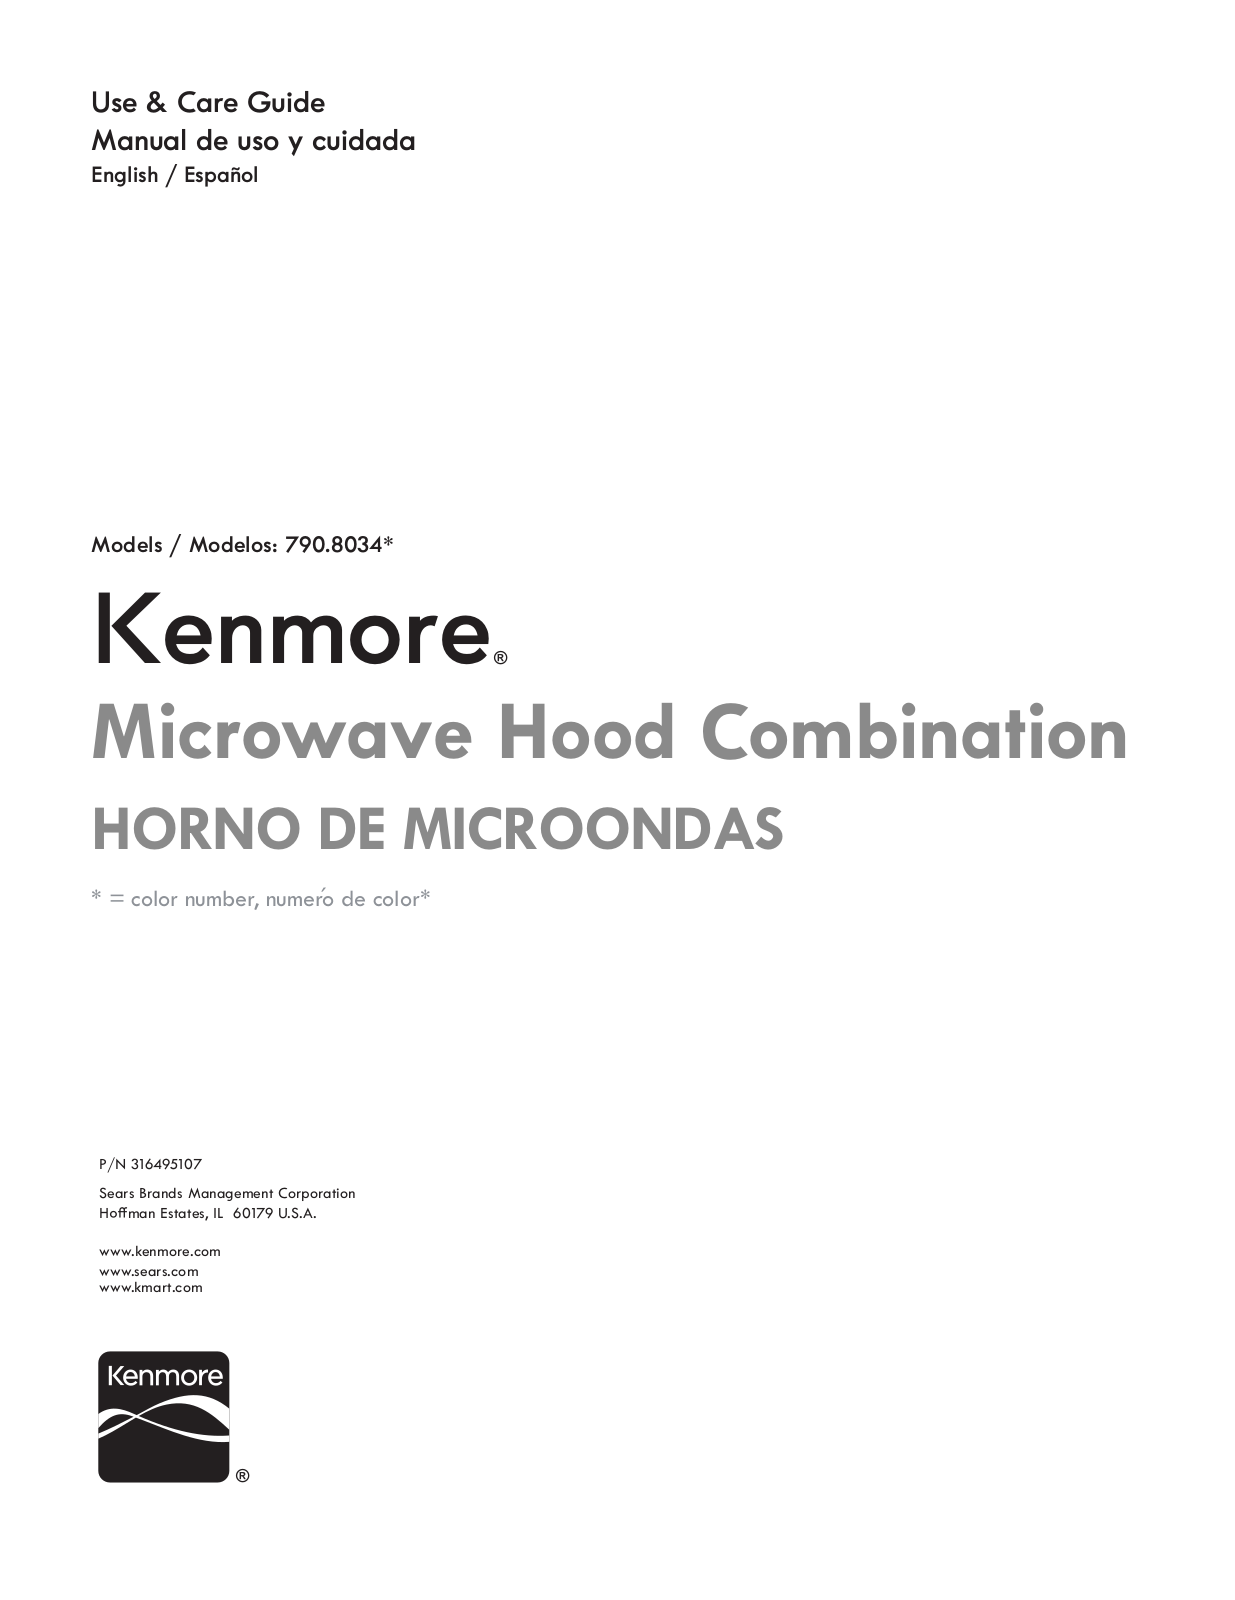 Kenmore 1.7 cu. ft. Over-the-Range Microwave Owner's Manual